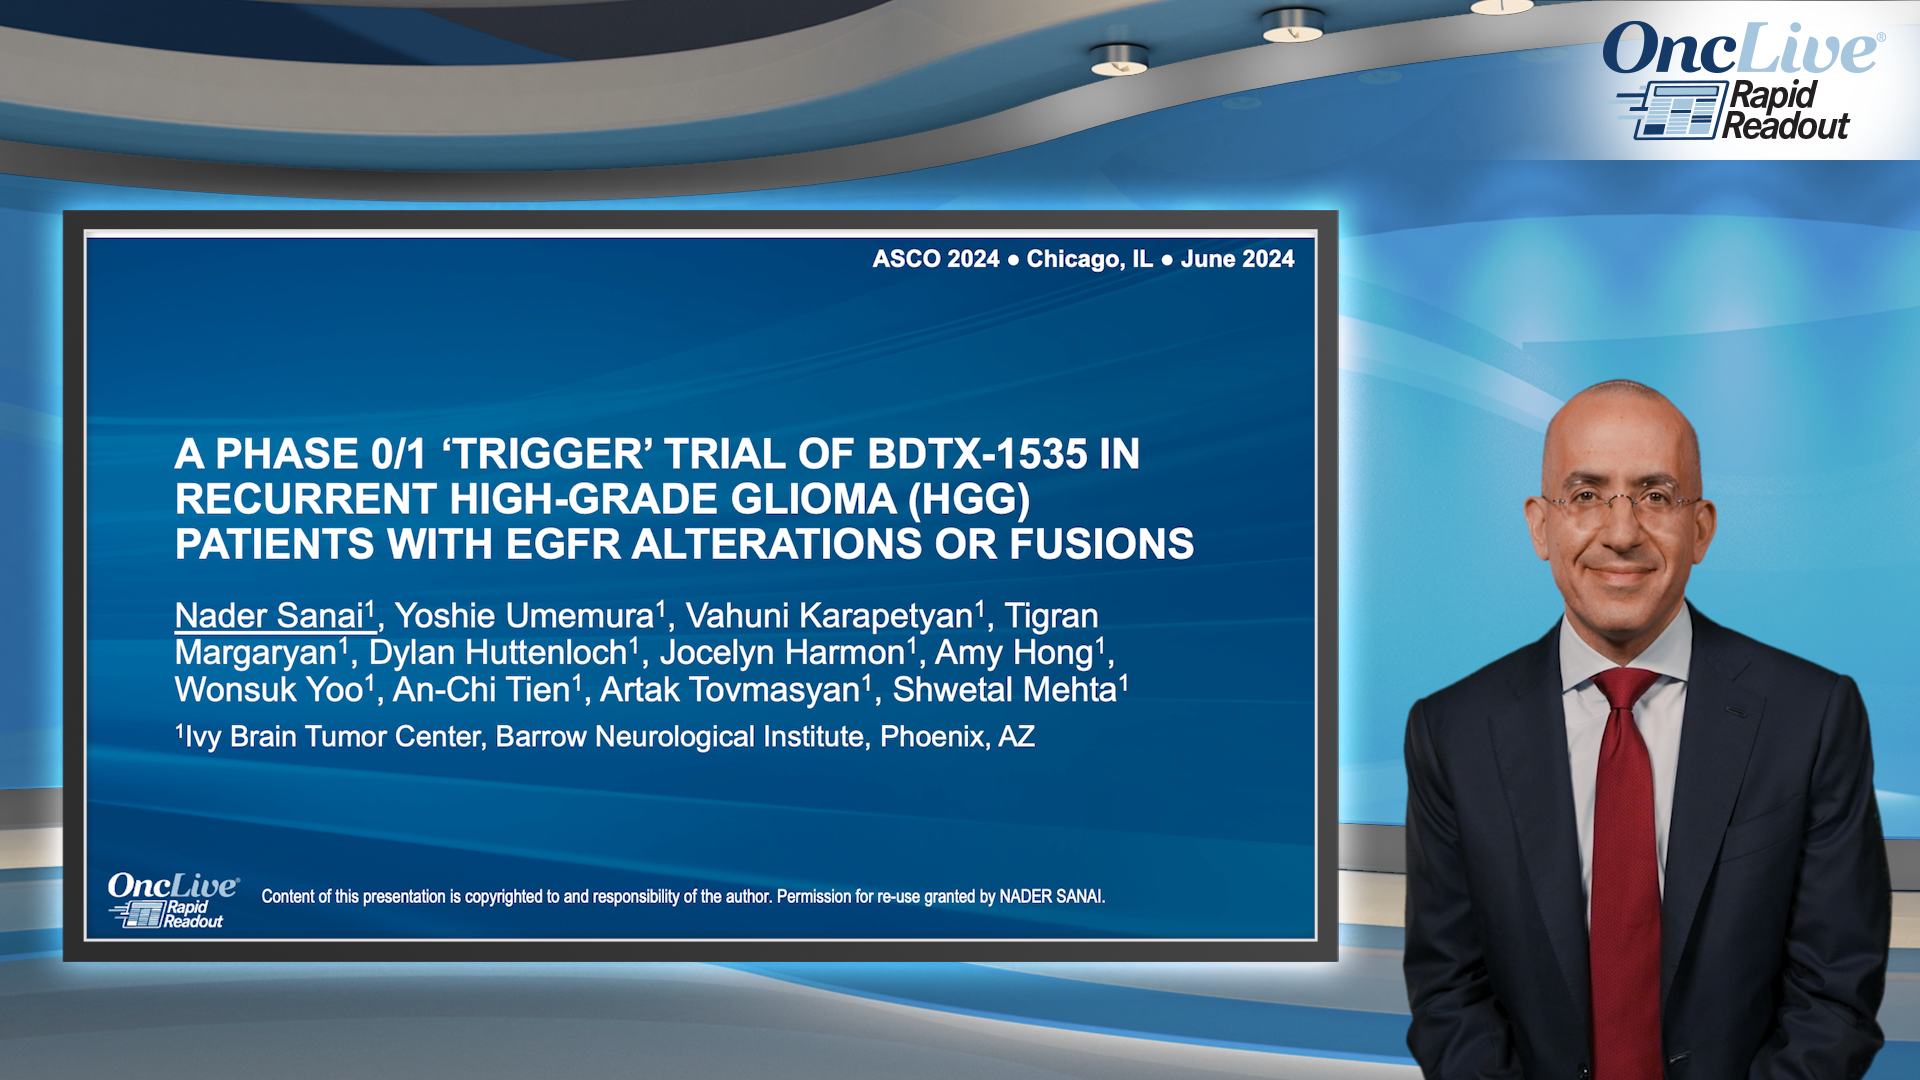 A Phase 0/1 ‘trigger’ trial of BDTX-1535 in recurrent high-grade glioma (HGG) patients with EGFR alterations or fusions 